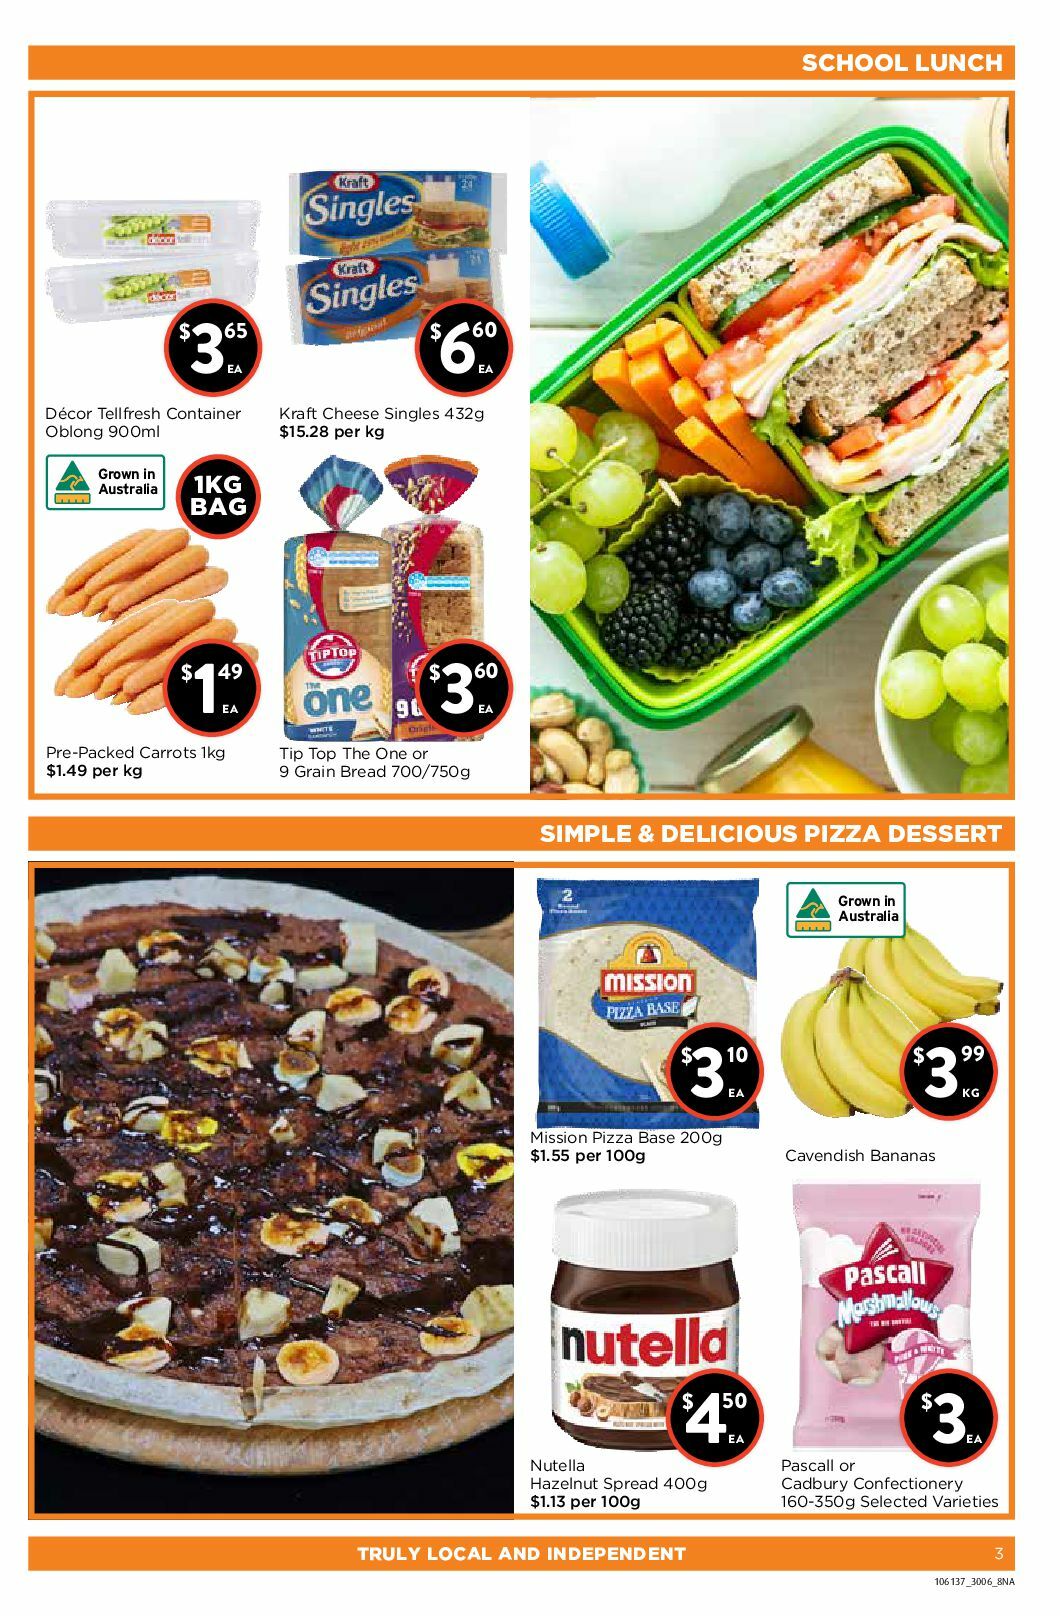 FoodWorks Catalogues from 30 June